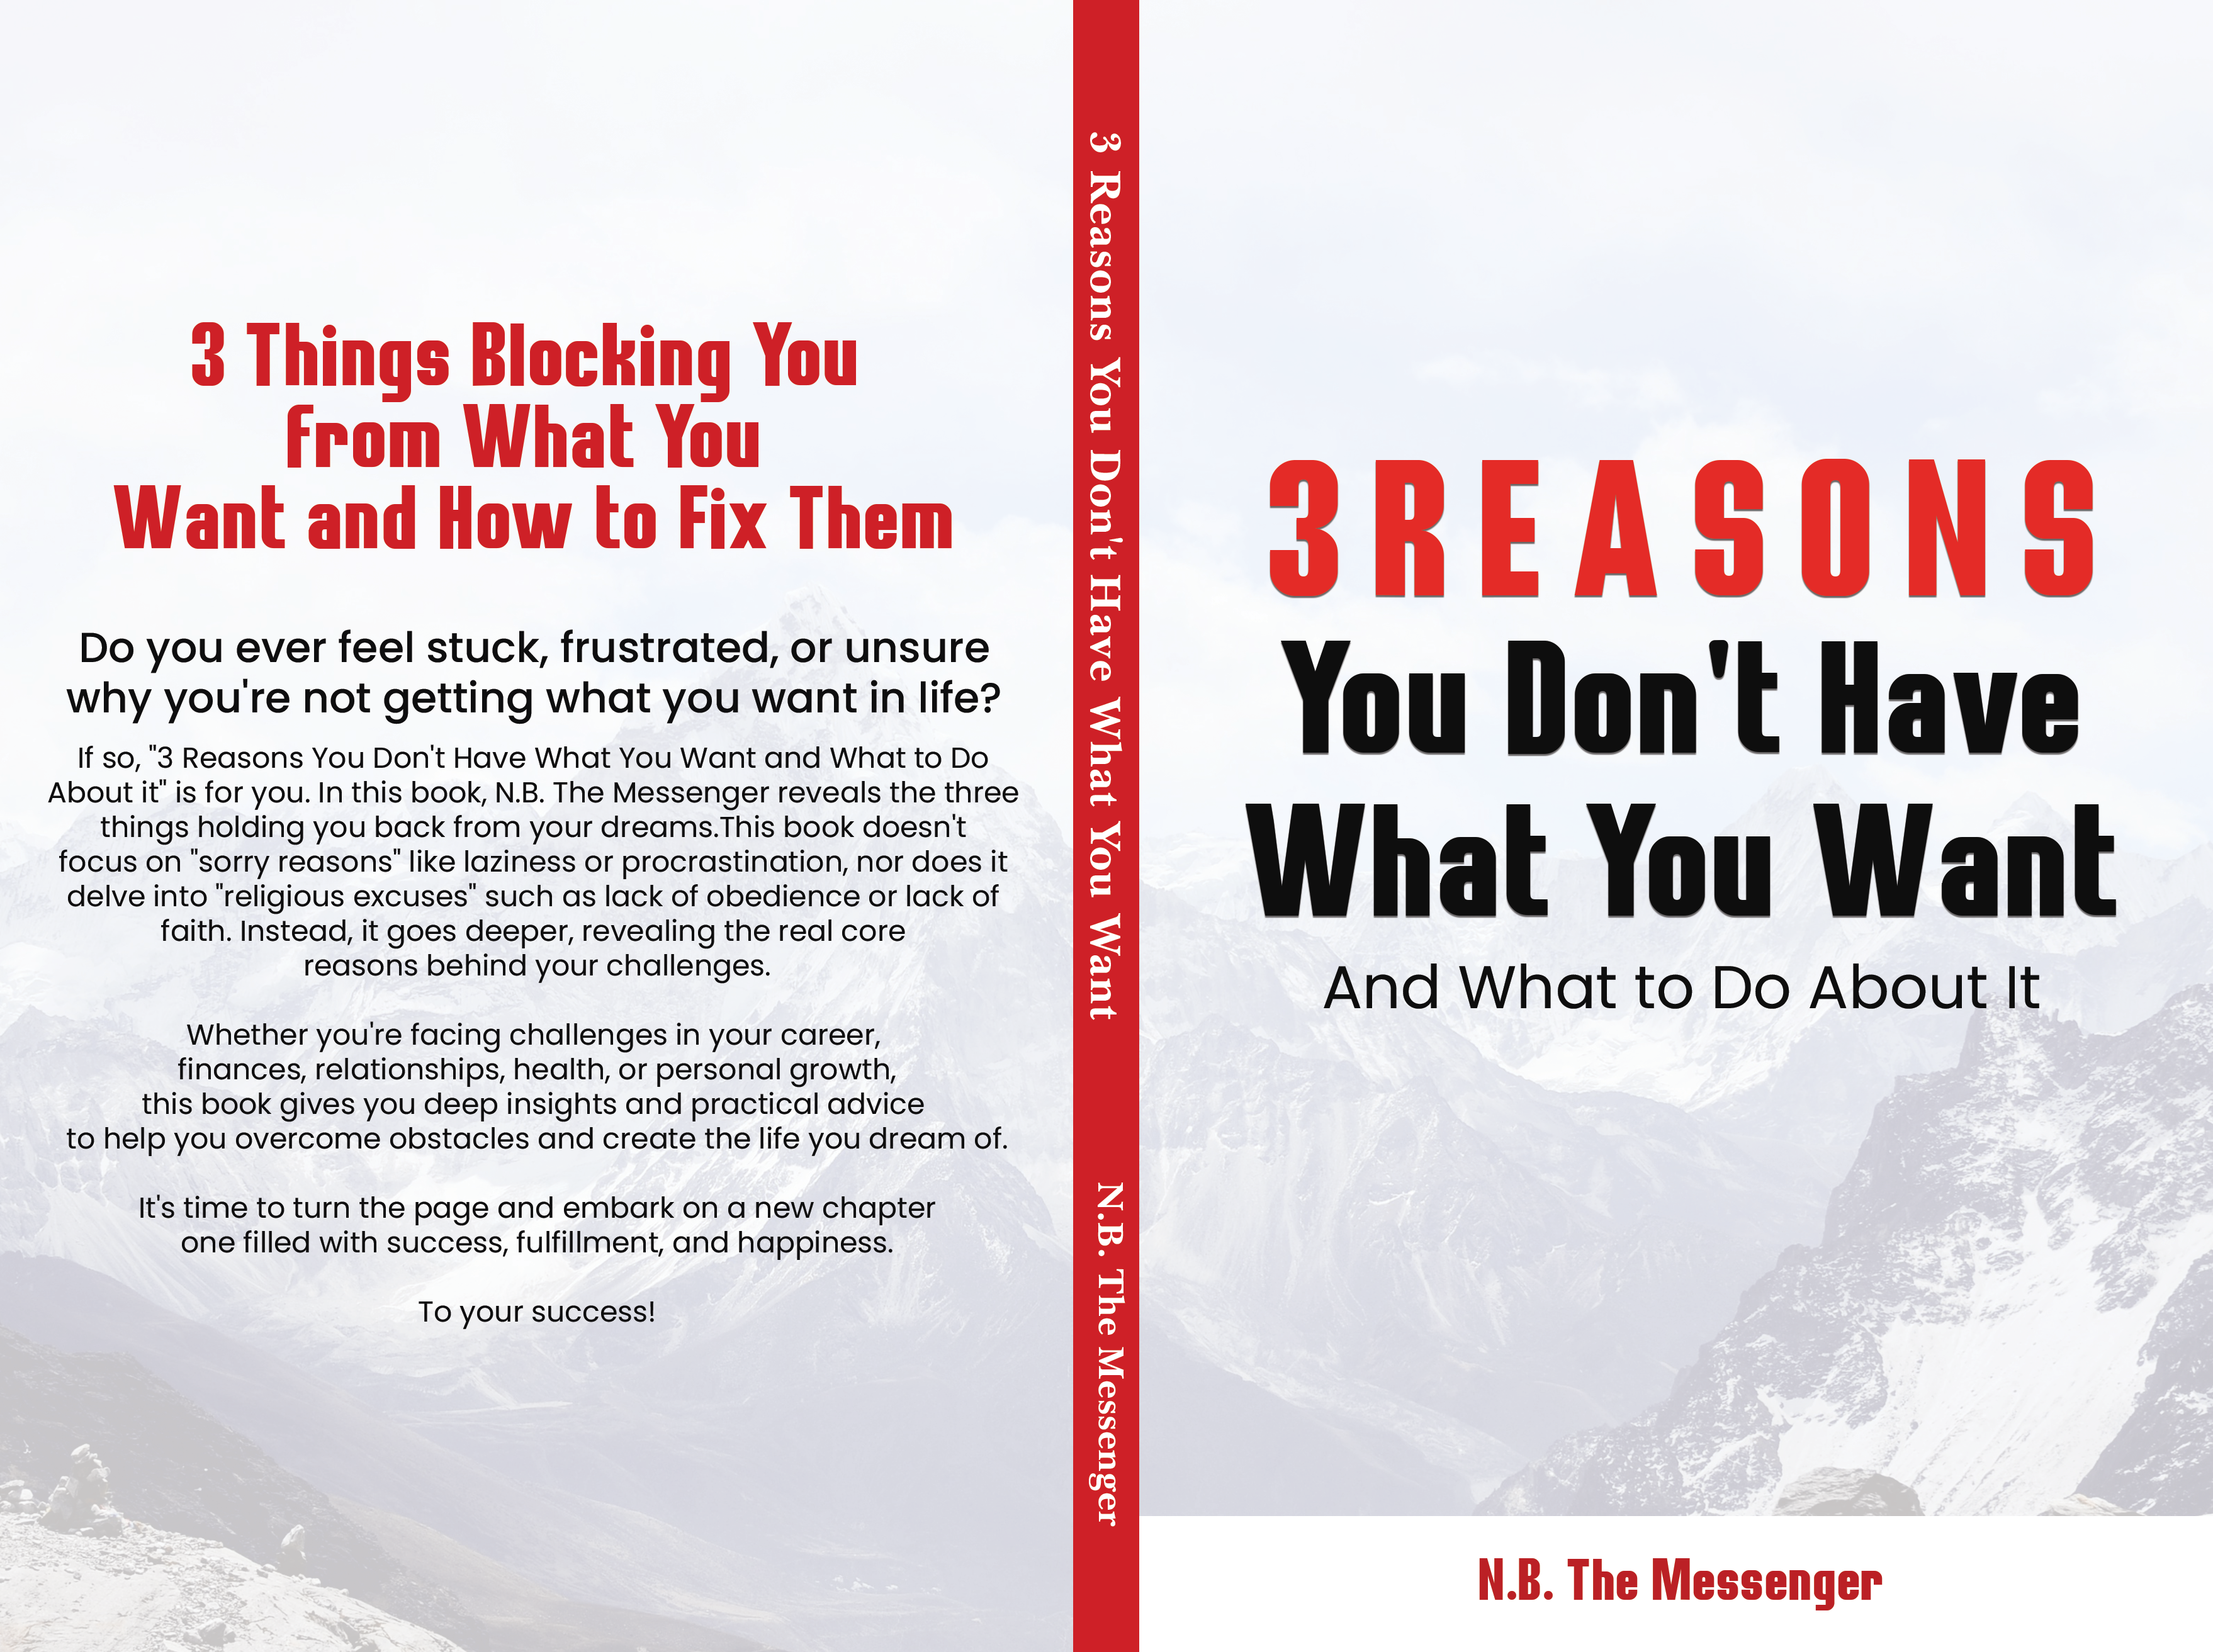 3 REASONS
YOU DON'T HAVE WHAT YOU WANT
AND WHAT TO DO ABOUT IT!